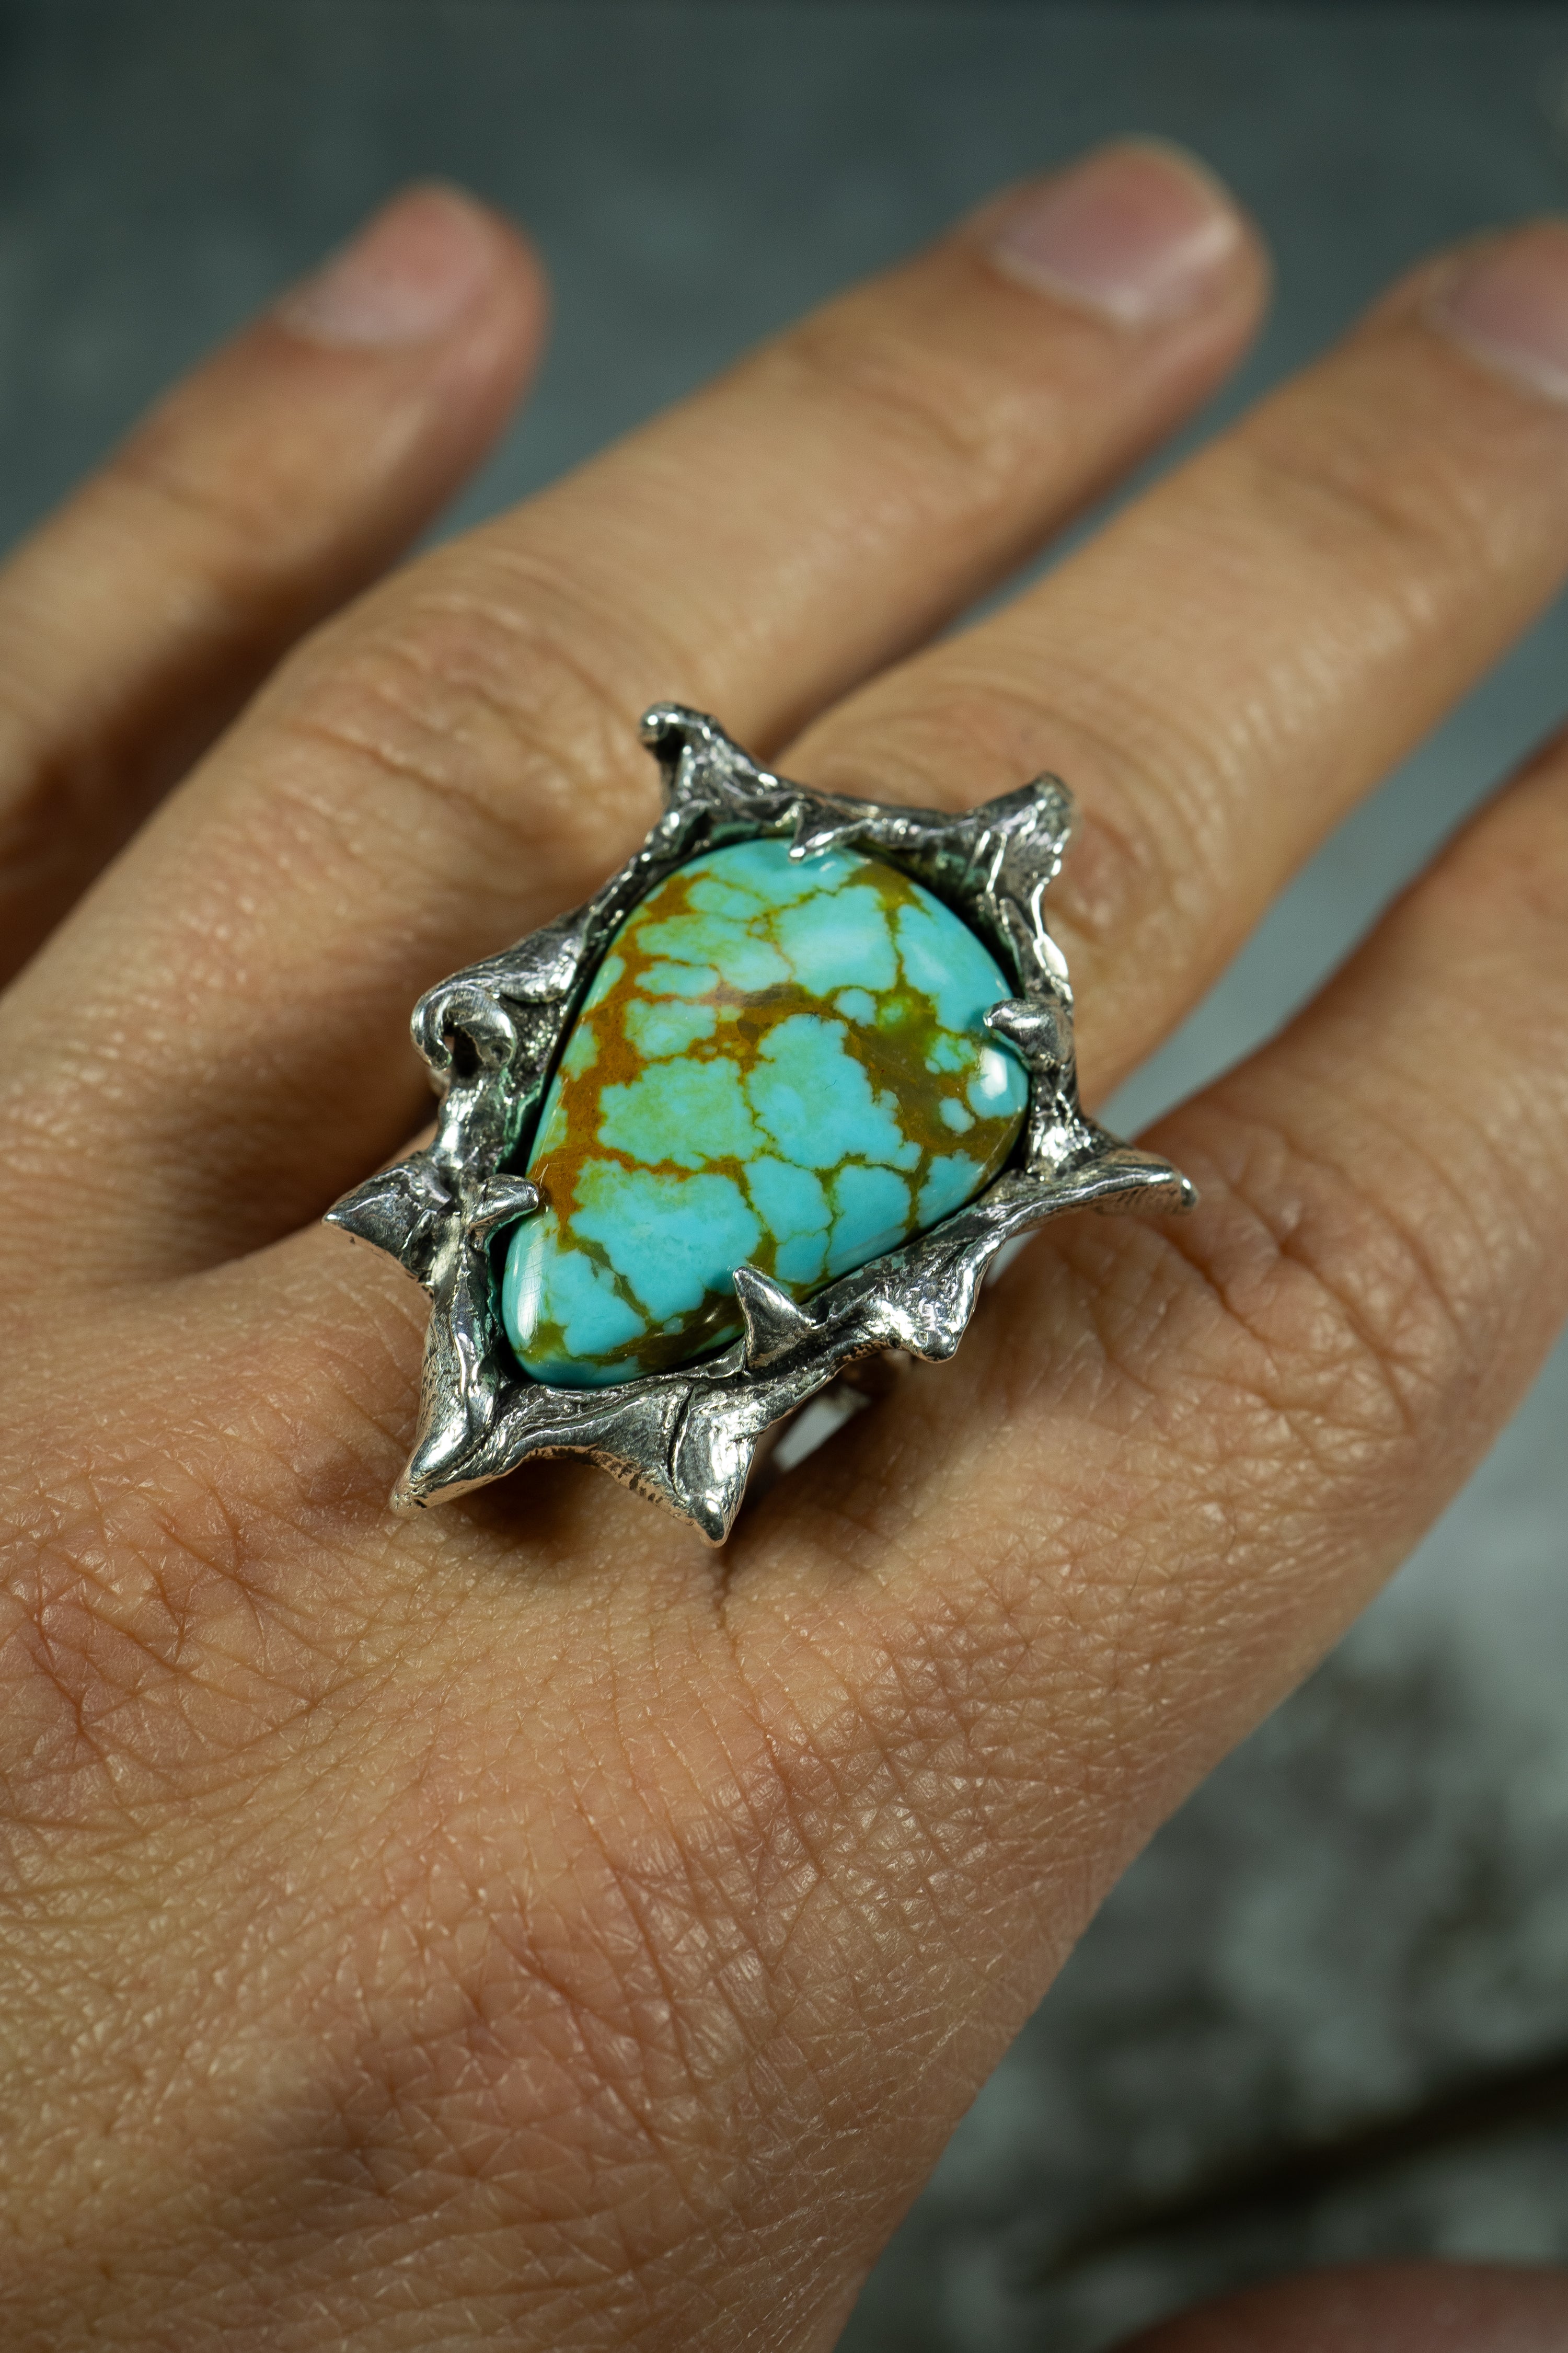 Genesis (Tyrone Turquoise, Sterling Silver Ring)